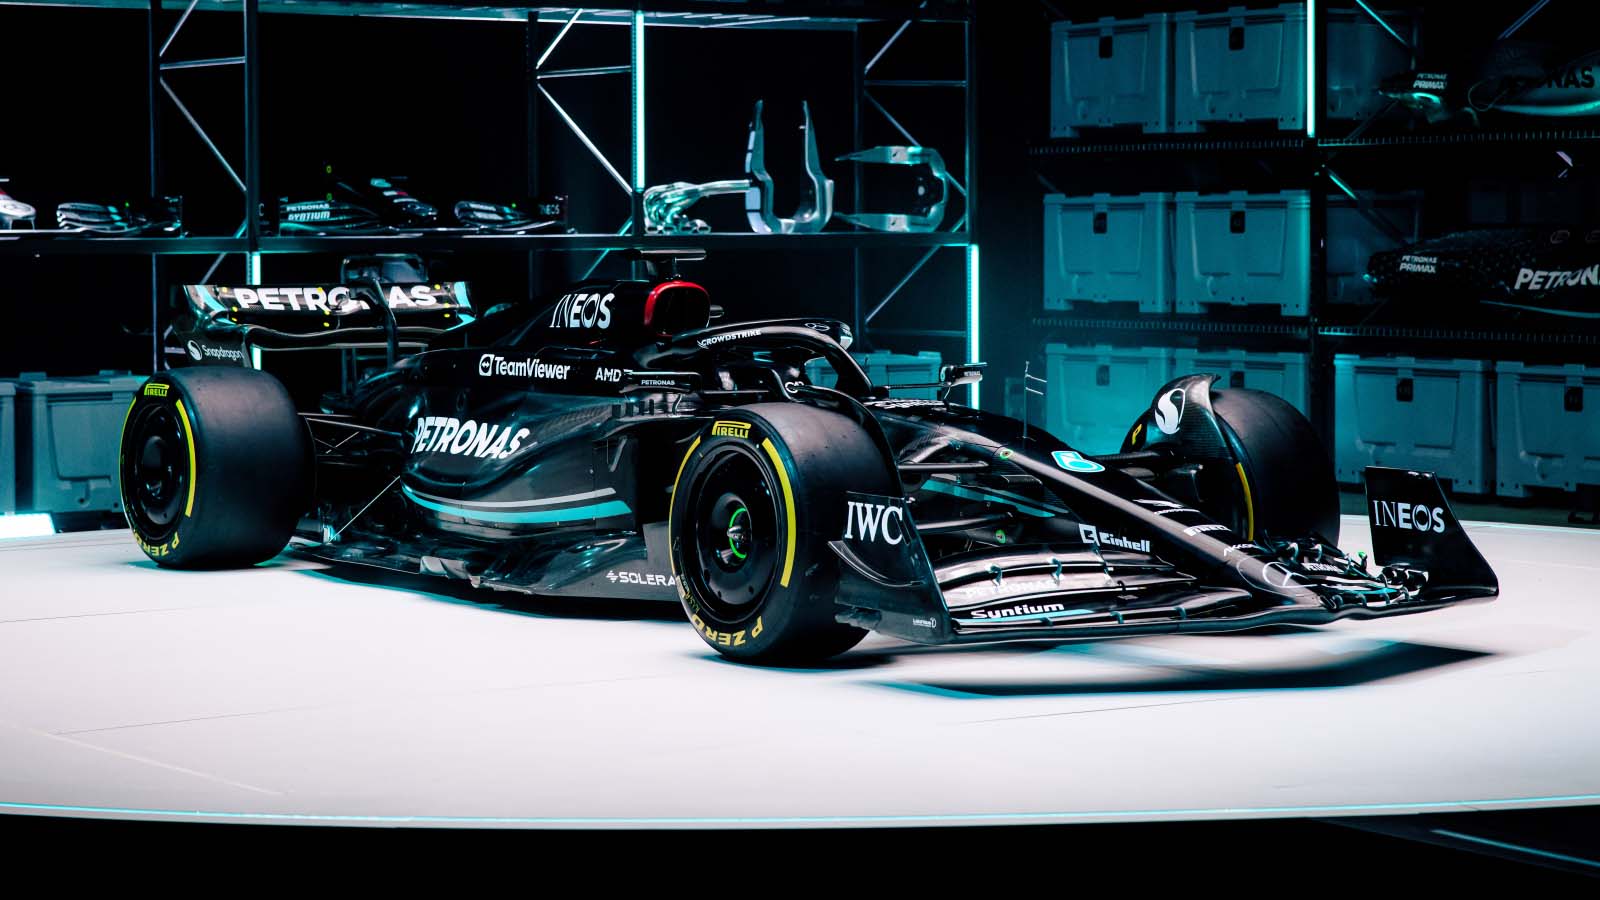 Lewis Hamilton and George Russell reveal the 2023 Mercedes F1 car, the W14